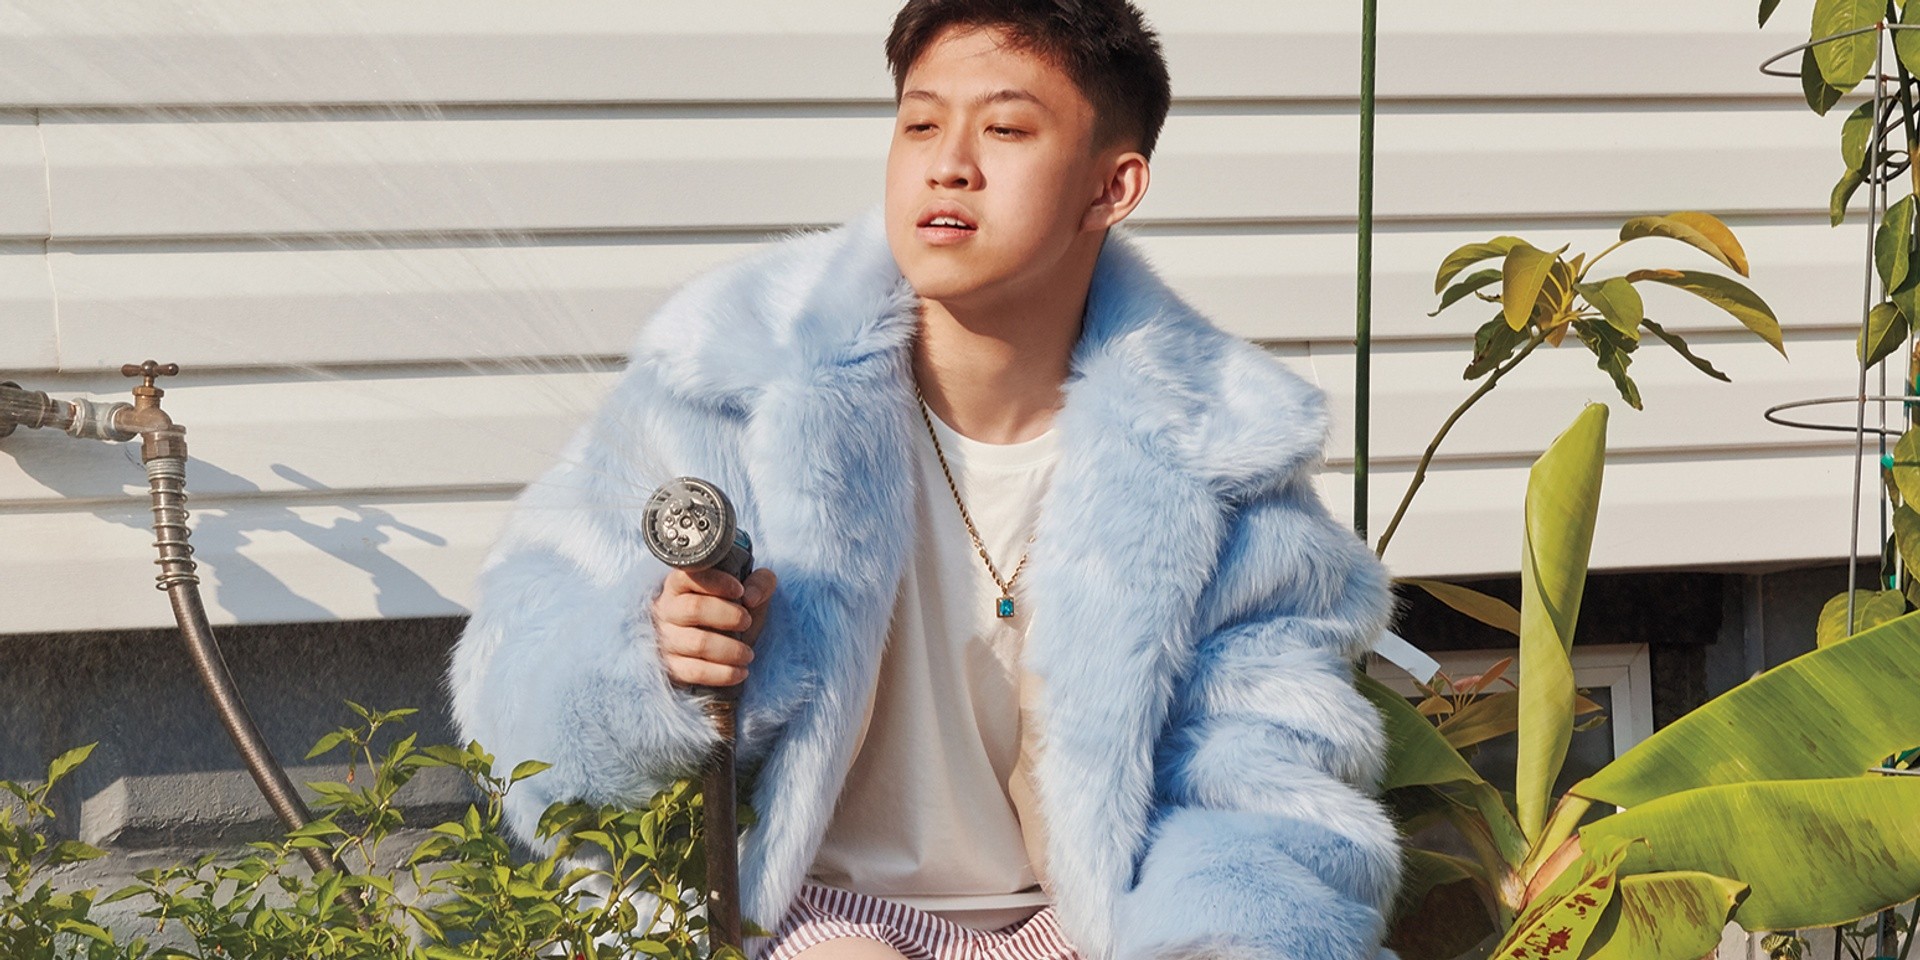 On Amen, Rich Brian wants America to take him (and his country) seriously